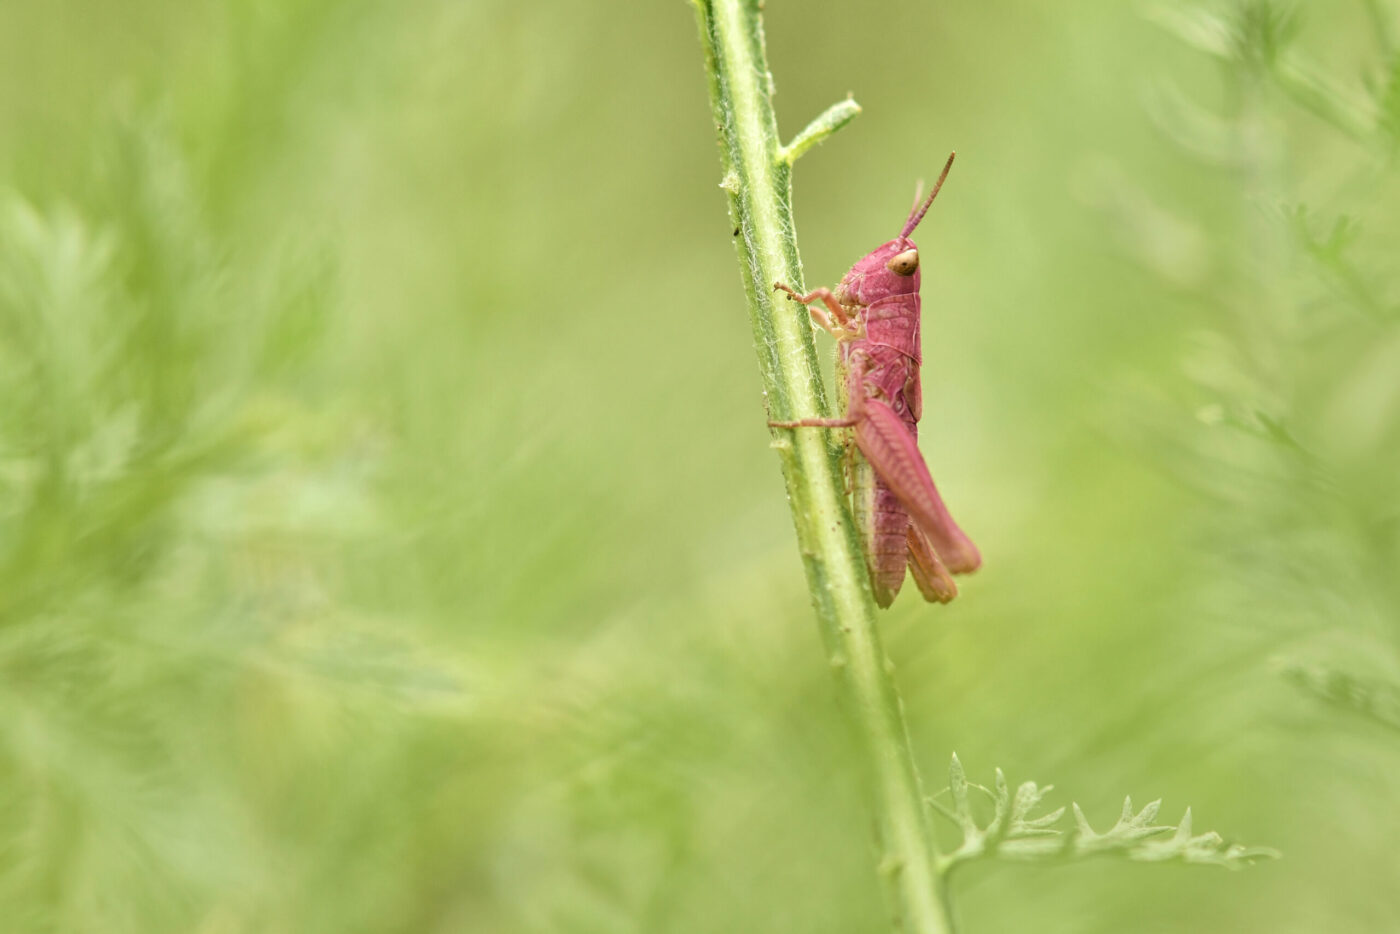 Pink Grasshopper with genetic mutation known as erythrism, which causes a reddish discolouration.